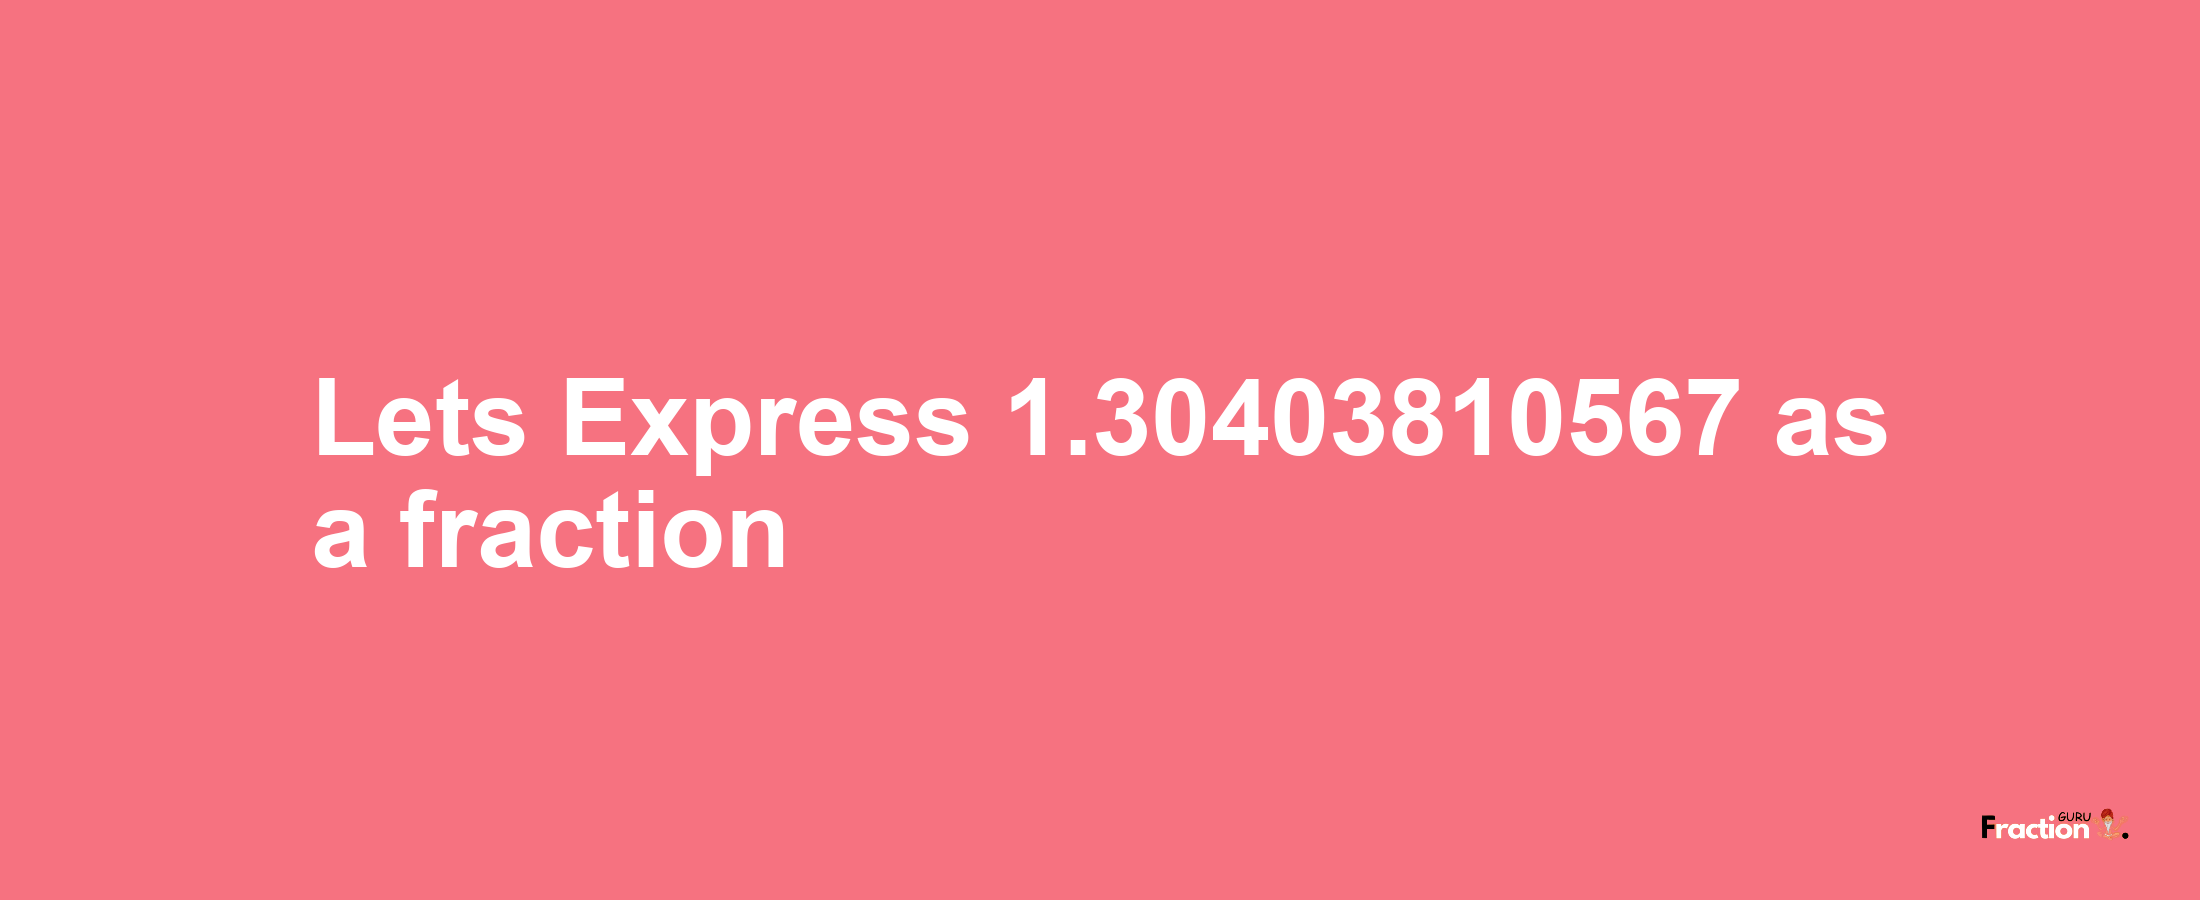 Lets Express 1.30403810567 as afraction